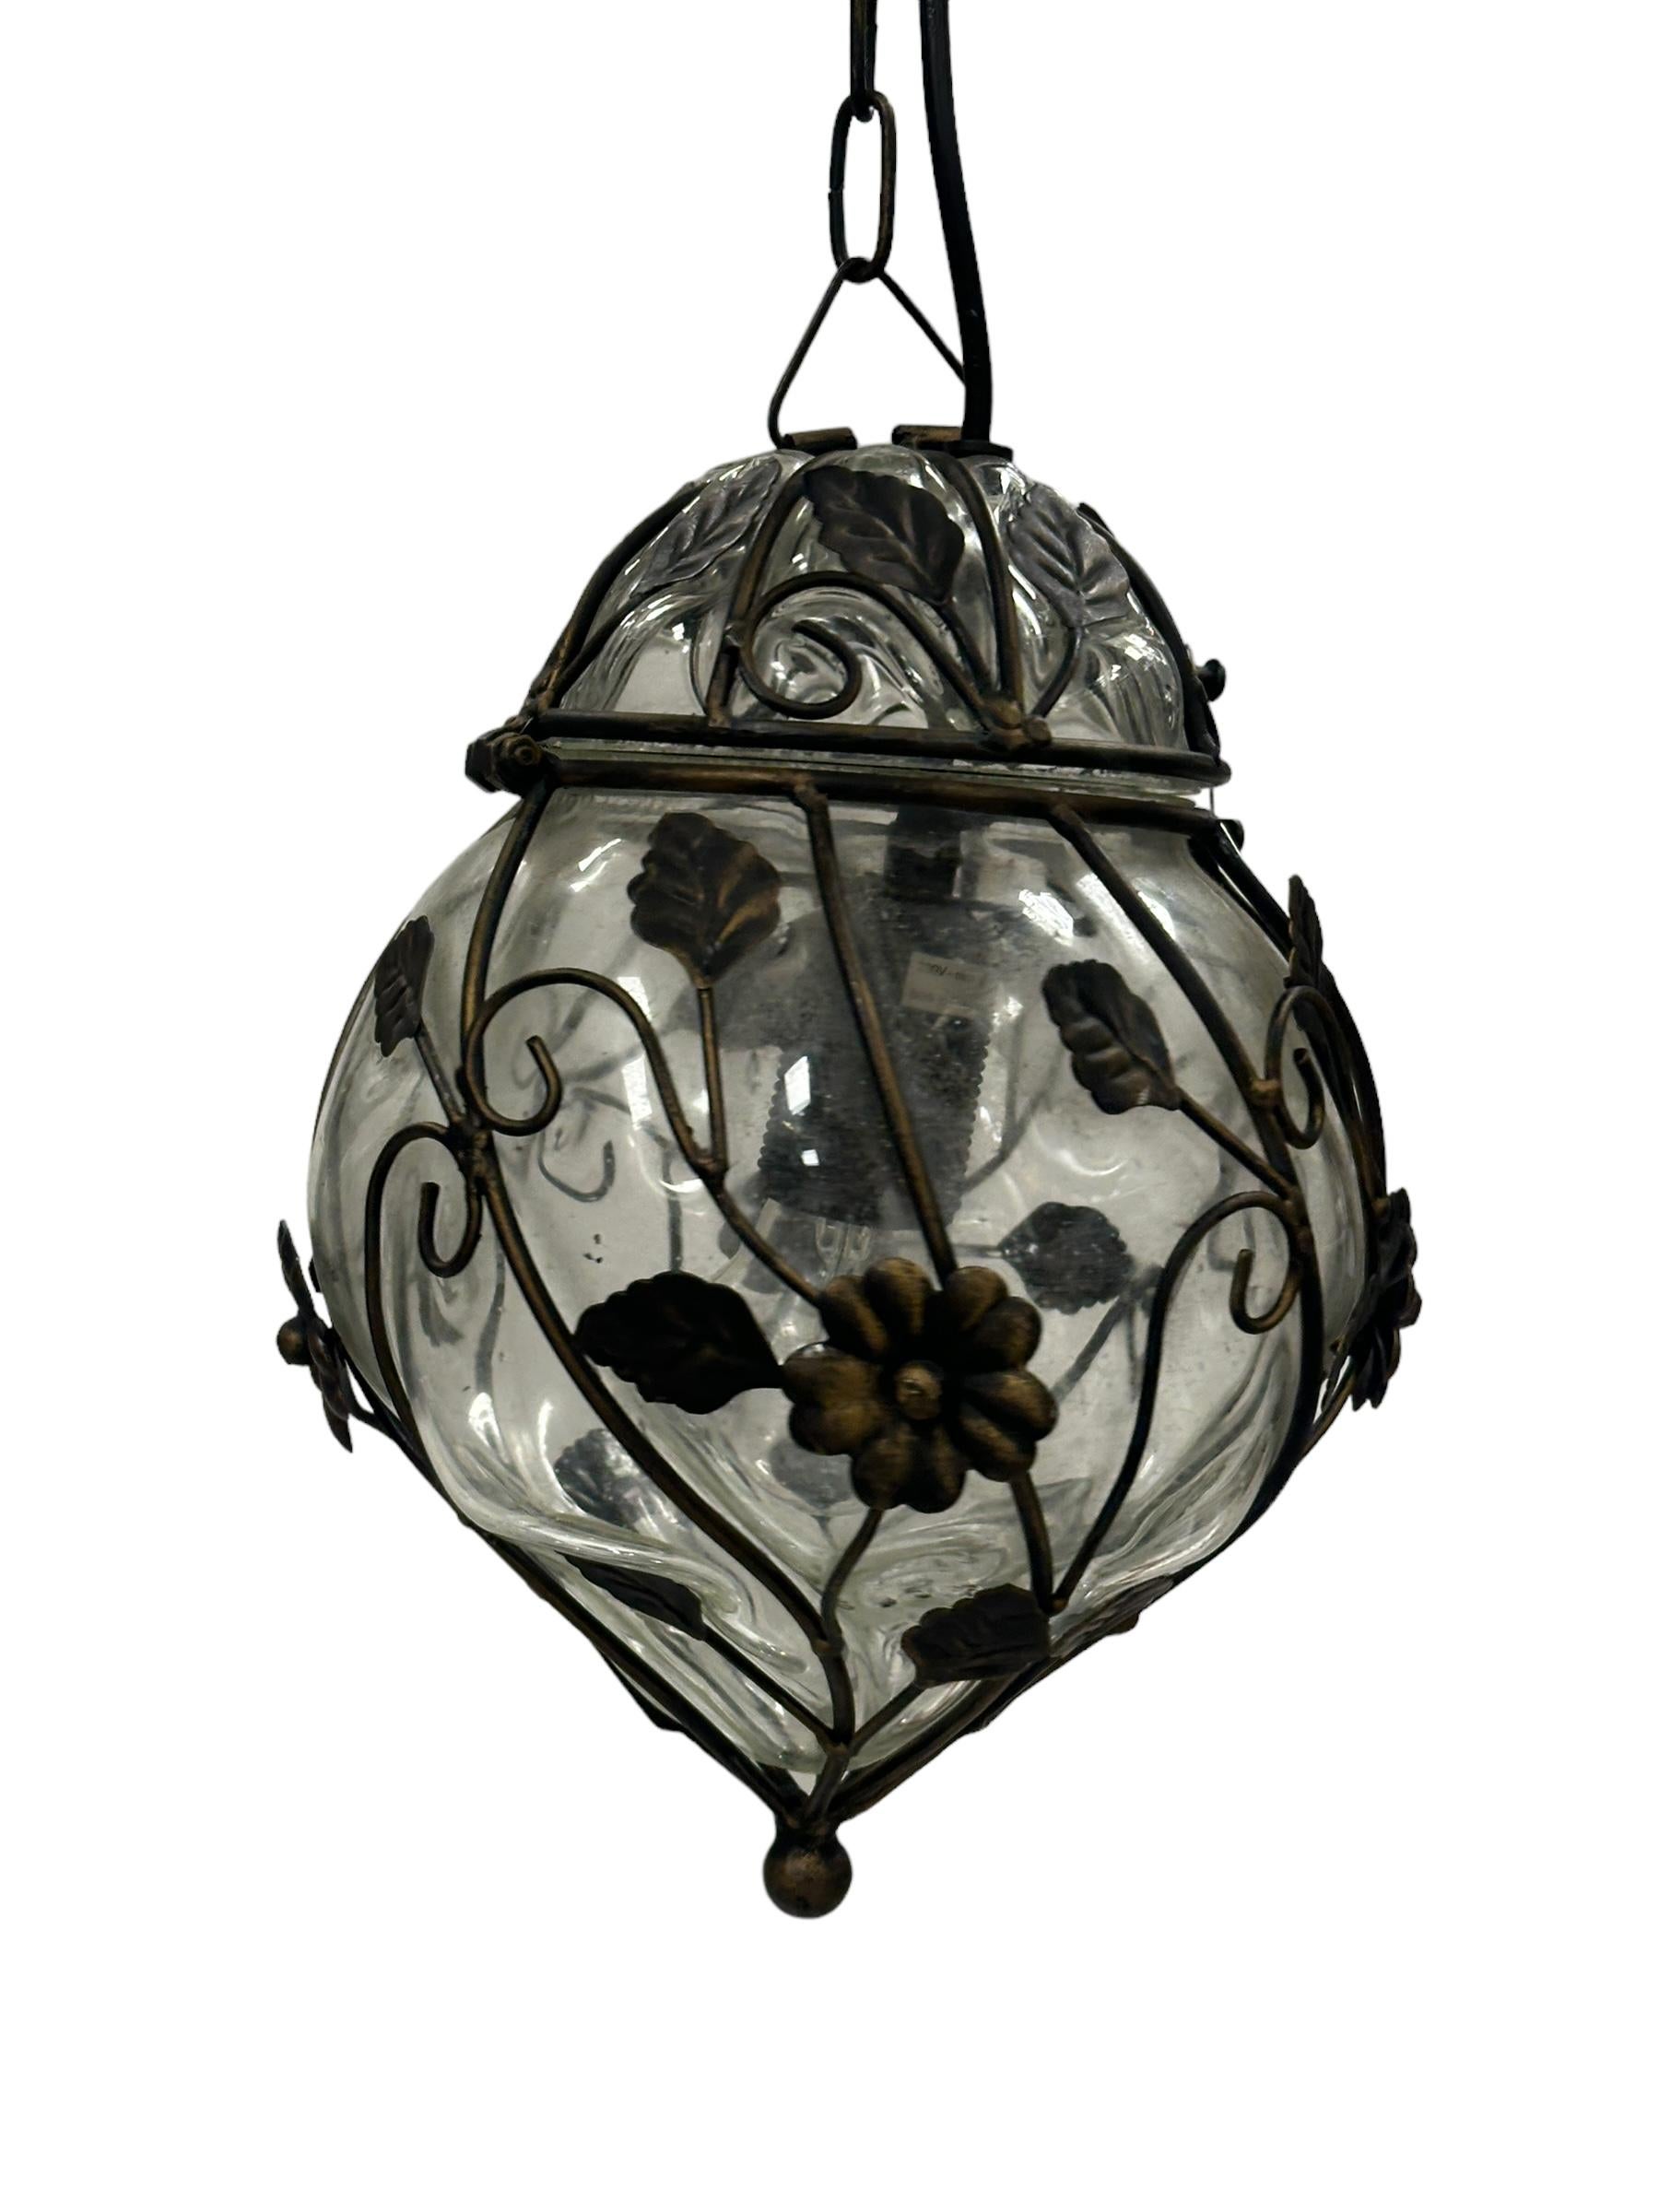 Metal Petite Murano Caged Glass Pendant Light, 1960s Italy vintage For Sale